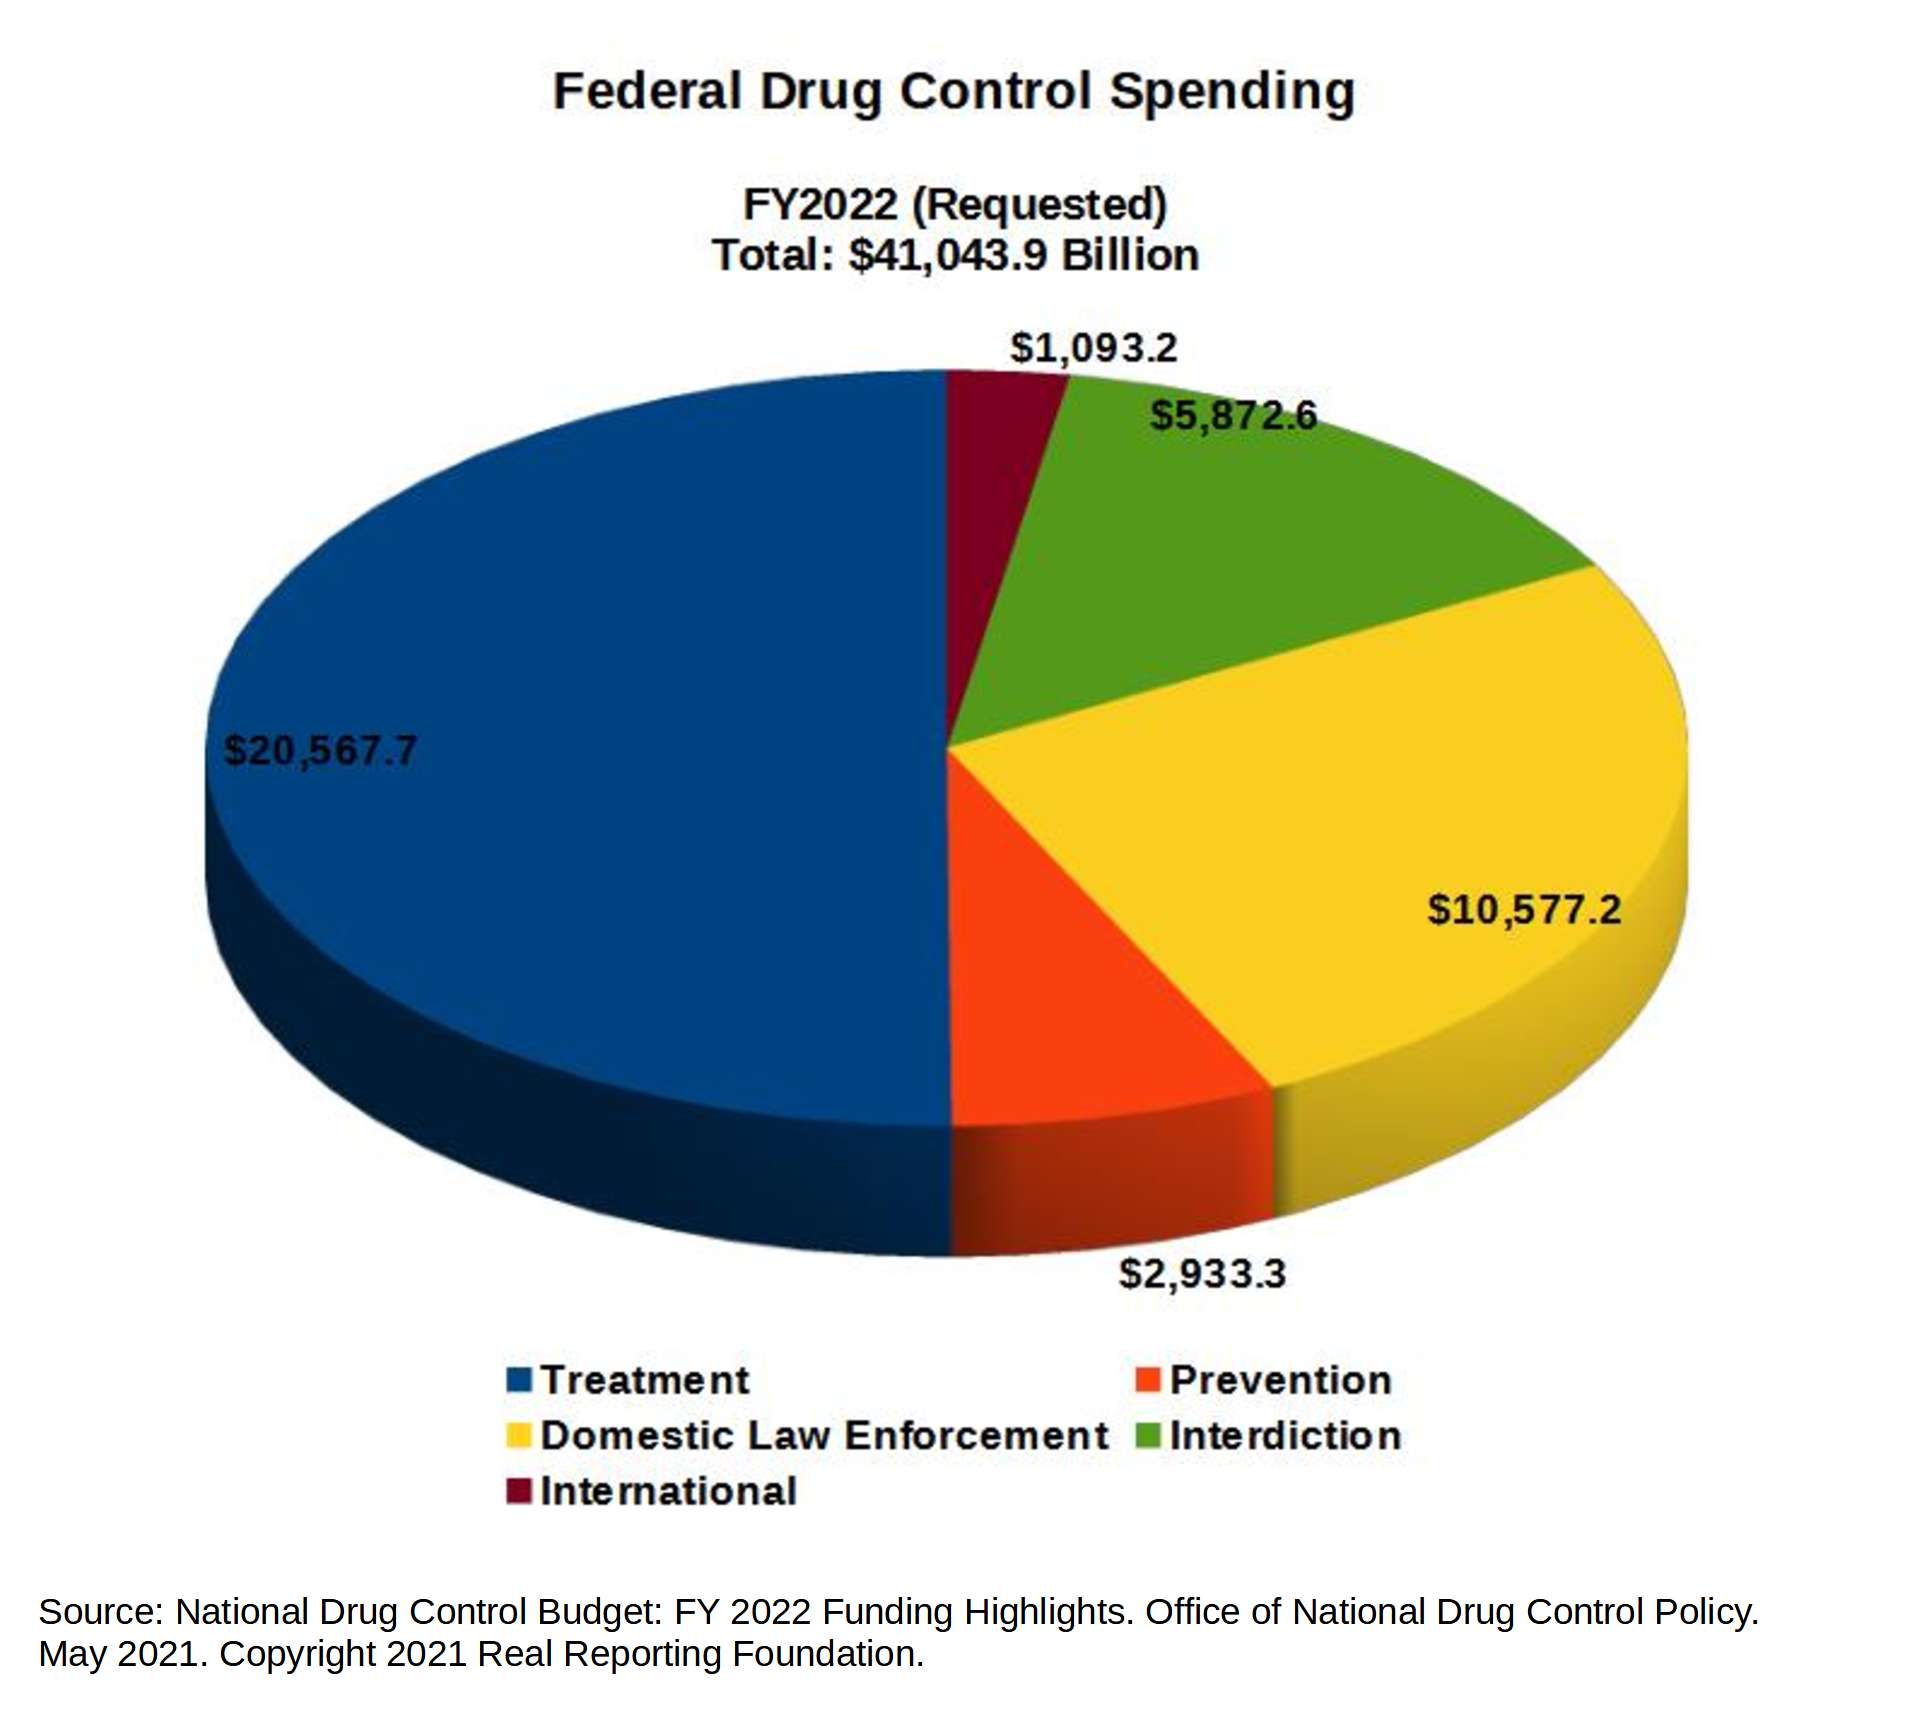 pie chart illustrating the breakdown by function of the FY2022 requested US federal drug control budget